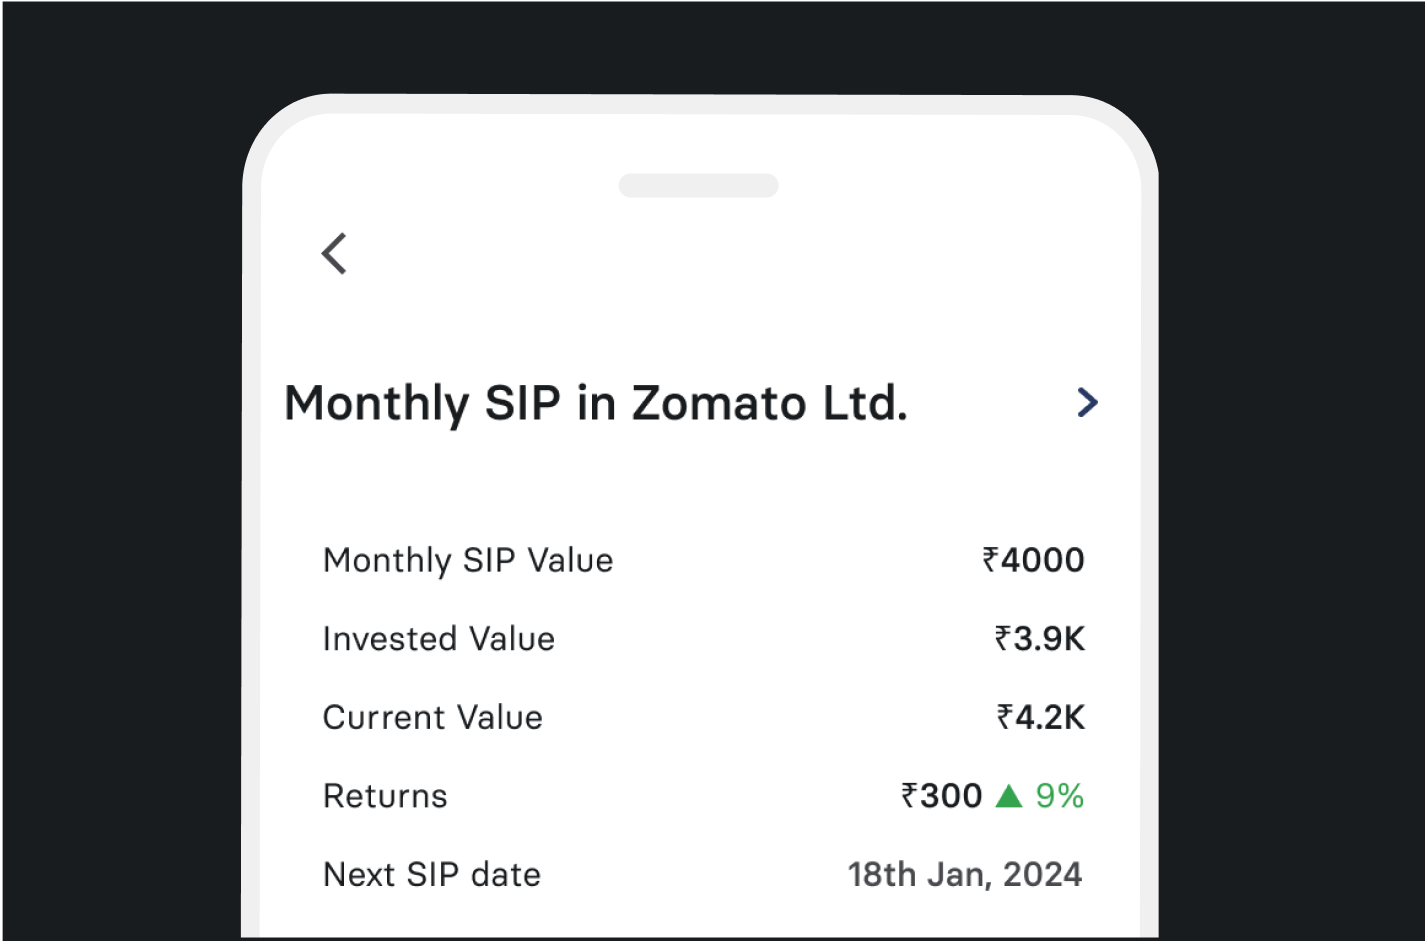 Control all your SIPs in Shares from one place